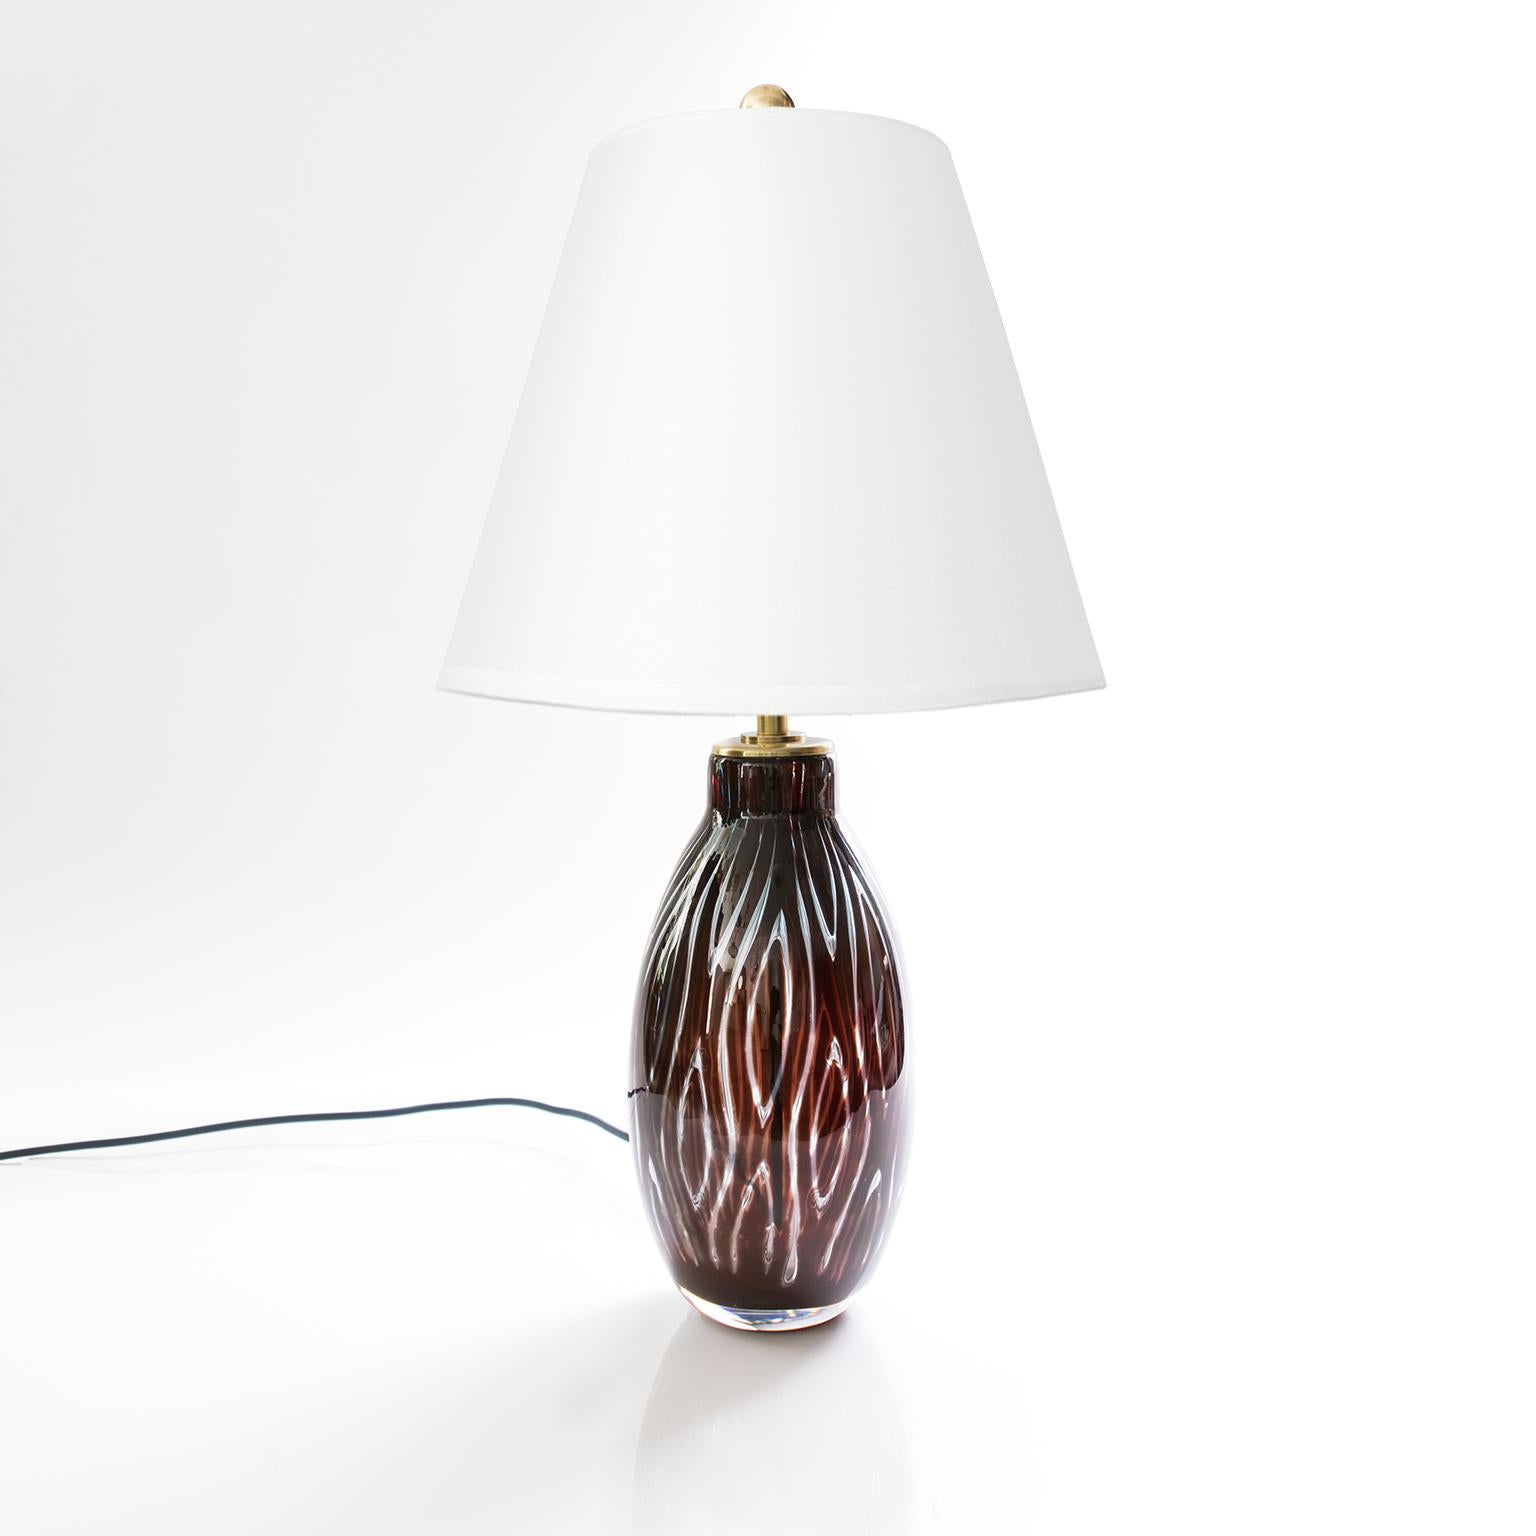 A Scandinavian Modern glass table lamp by Swedish designer Edvin Ohrstrom for Orrefors. The lamp was made using the 